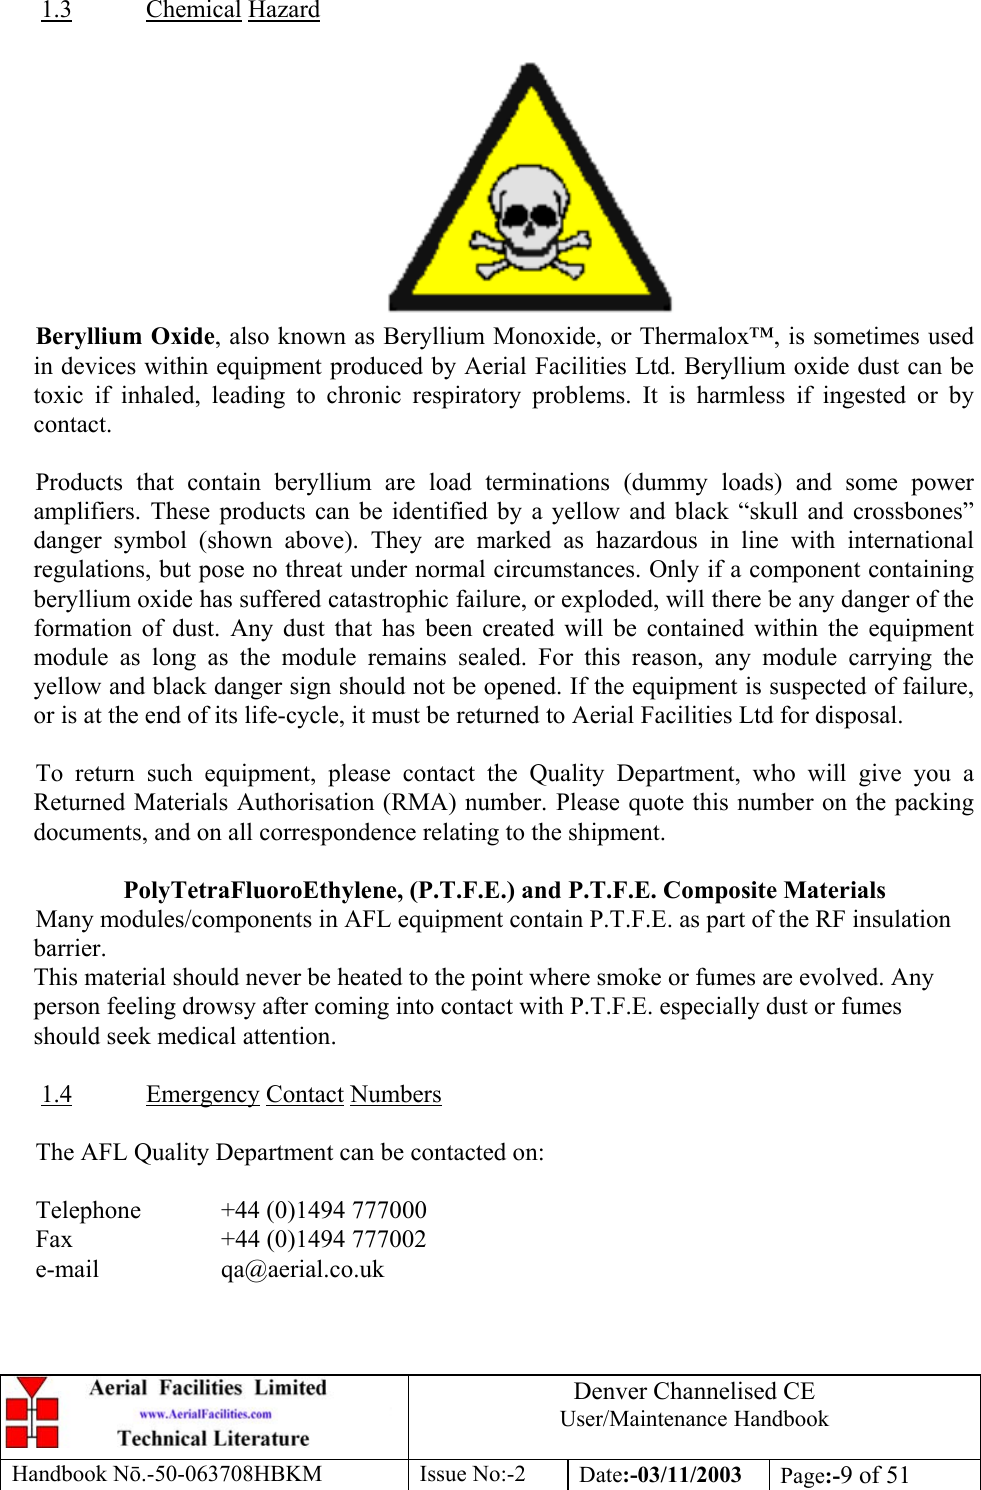 Denver Channelised CEUser/Maintenance HandbookHandbook Nō.-50-063708HBKM Issue No:-2 Date:-03/11/2003 Page:-9 of 511.3 Chemical HazardBeryllium Oxide, also known as Beryllium Monoxide, or Thermalox™, is sometimes usedin devices within equipment produced by Aerial Facilities Ltd. Beryllium oxide dust can betoxic if inhaled, leading to chronic respiratory problems. It is harmless if ingested or bycontact.Products that contain beryllium are load terminations (dummy loads) and some poweramplifiers. These products can be identified by a yellow and black “skull and crossbones”danger symbol (shown above). They are marked as hazardous in line with internationalregulations, but pose no threat under normal circumstances. Only if a component containingberyllium oxide has suffered catastrophic failure, or exploded, will there be any danger of theformation of dust. Any dust that has been created will be contained within the equipmentmodule as long as the module remains sealed. For this reason, any module carrying theyellow and black danger sign should not be opened. If the equipment is suspected of failure,or is at the end of its life-cycle, it must be returned to Aerial Facilities Ltd for disposal.To return such equipment, please contact the Quality Department, who will give you aReturned Materials Authorisation (RMA) number. Please quote this number on the packingdocuments, and on all correspondence relating to the shipment.PolyTetraFluoroEthylene, (P.T.F.E.) and P.T.F.E. Composite MaterialsMany modules/components in AFL equipment contain P.T.F.E. as part of the RF insulationbarrier.This material should never be heated to the point where smoke or fumes are evolved. Anyperson feeling drowsy after coming into contact with P.T.F.E. especially dust or fumesshould seek medical attention.1.4 Emergency Contact NumbersThe AFL Quality Department can be contacted on:Telephone  +44 (0)1494 777000Fax +44 (0)1494 777002e-mail qa@aerial.co.uk